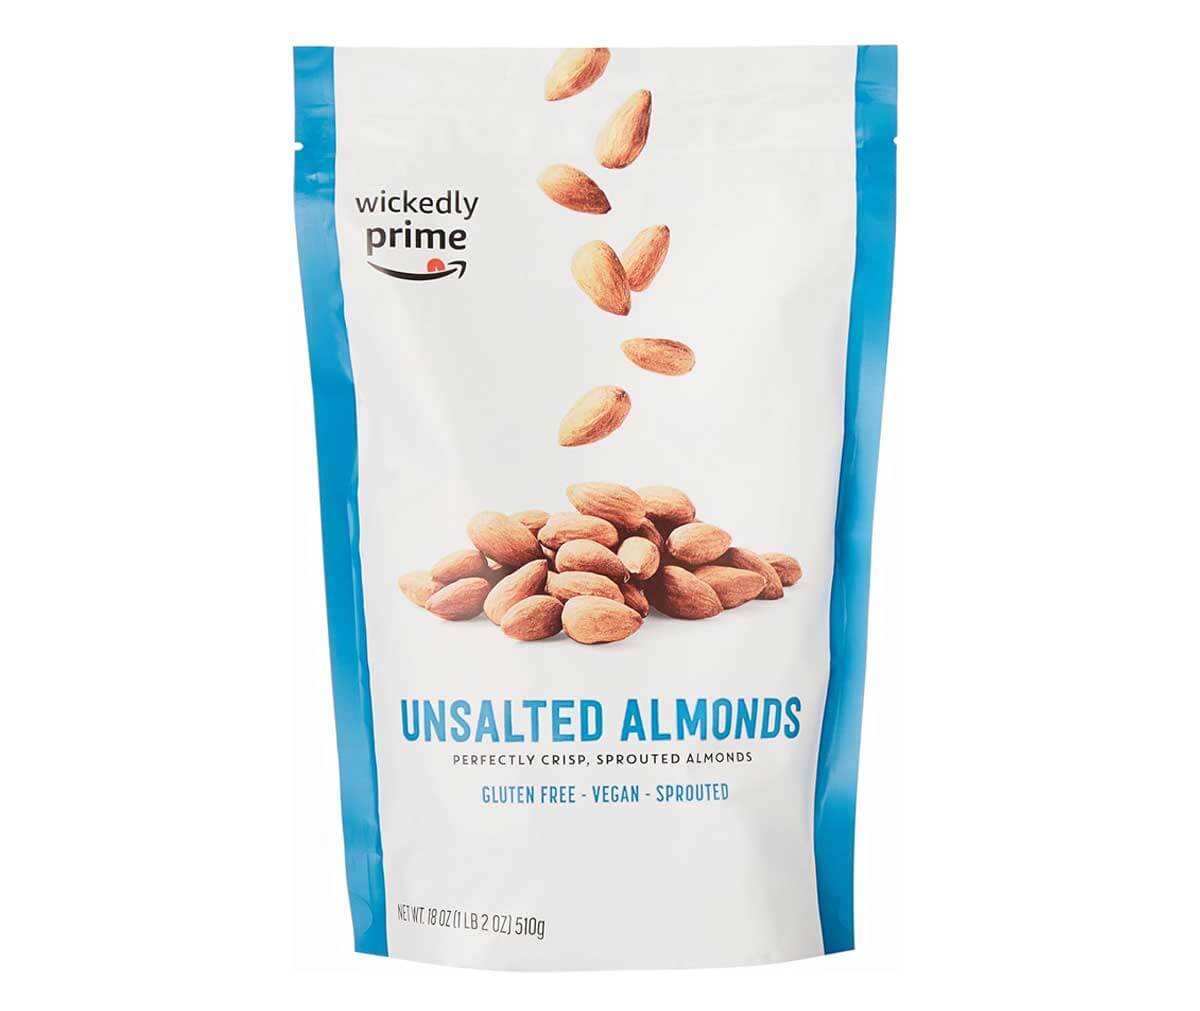 Whole30 Wickedly Prime sprouted almonds